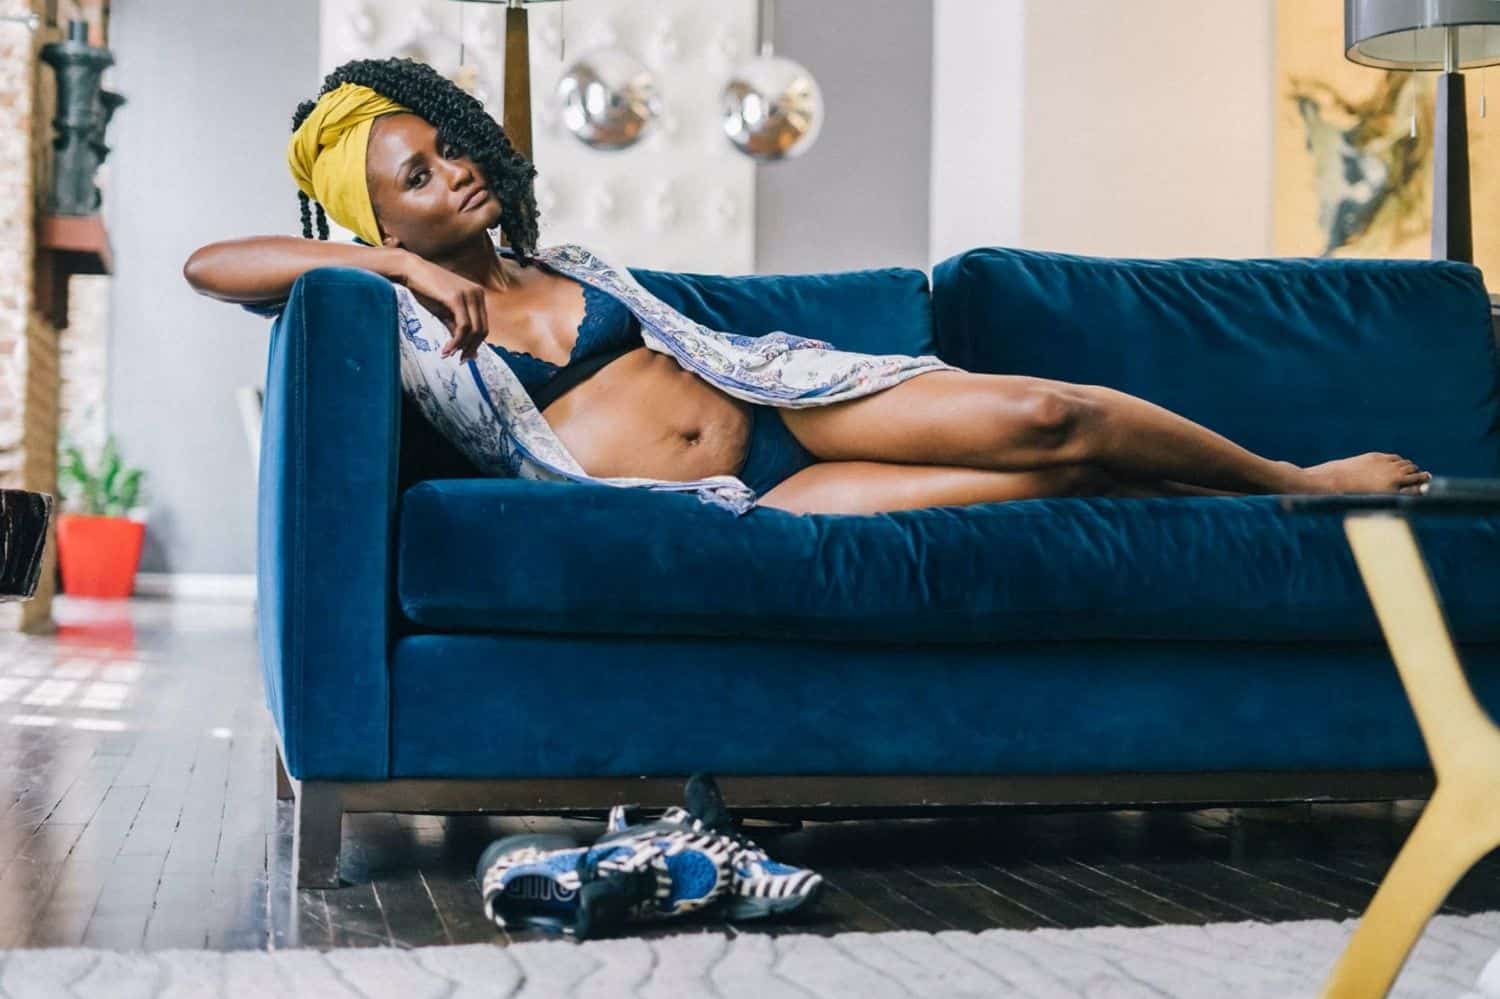 A person with dark skin wearing blue lingerie reclines on a blue velvet sofa. They wear a bright yellow head wrap and look serenely at the camera as they are photographed by Toni Black